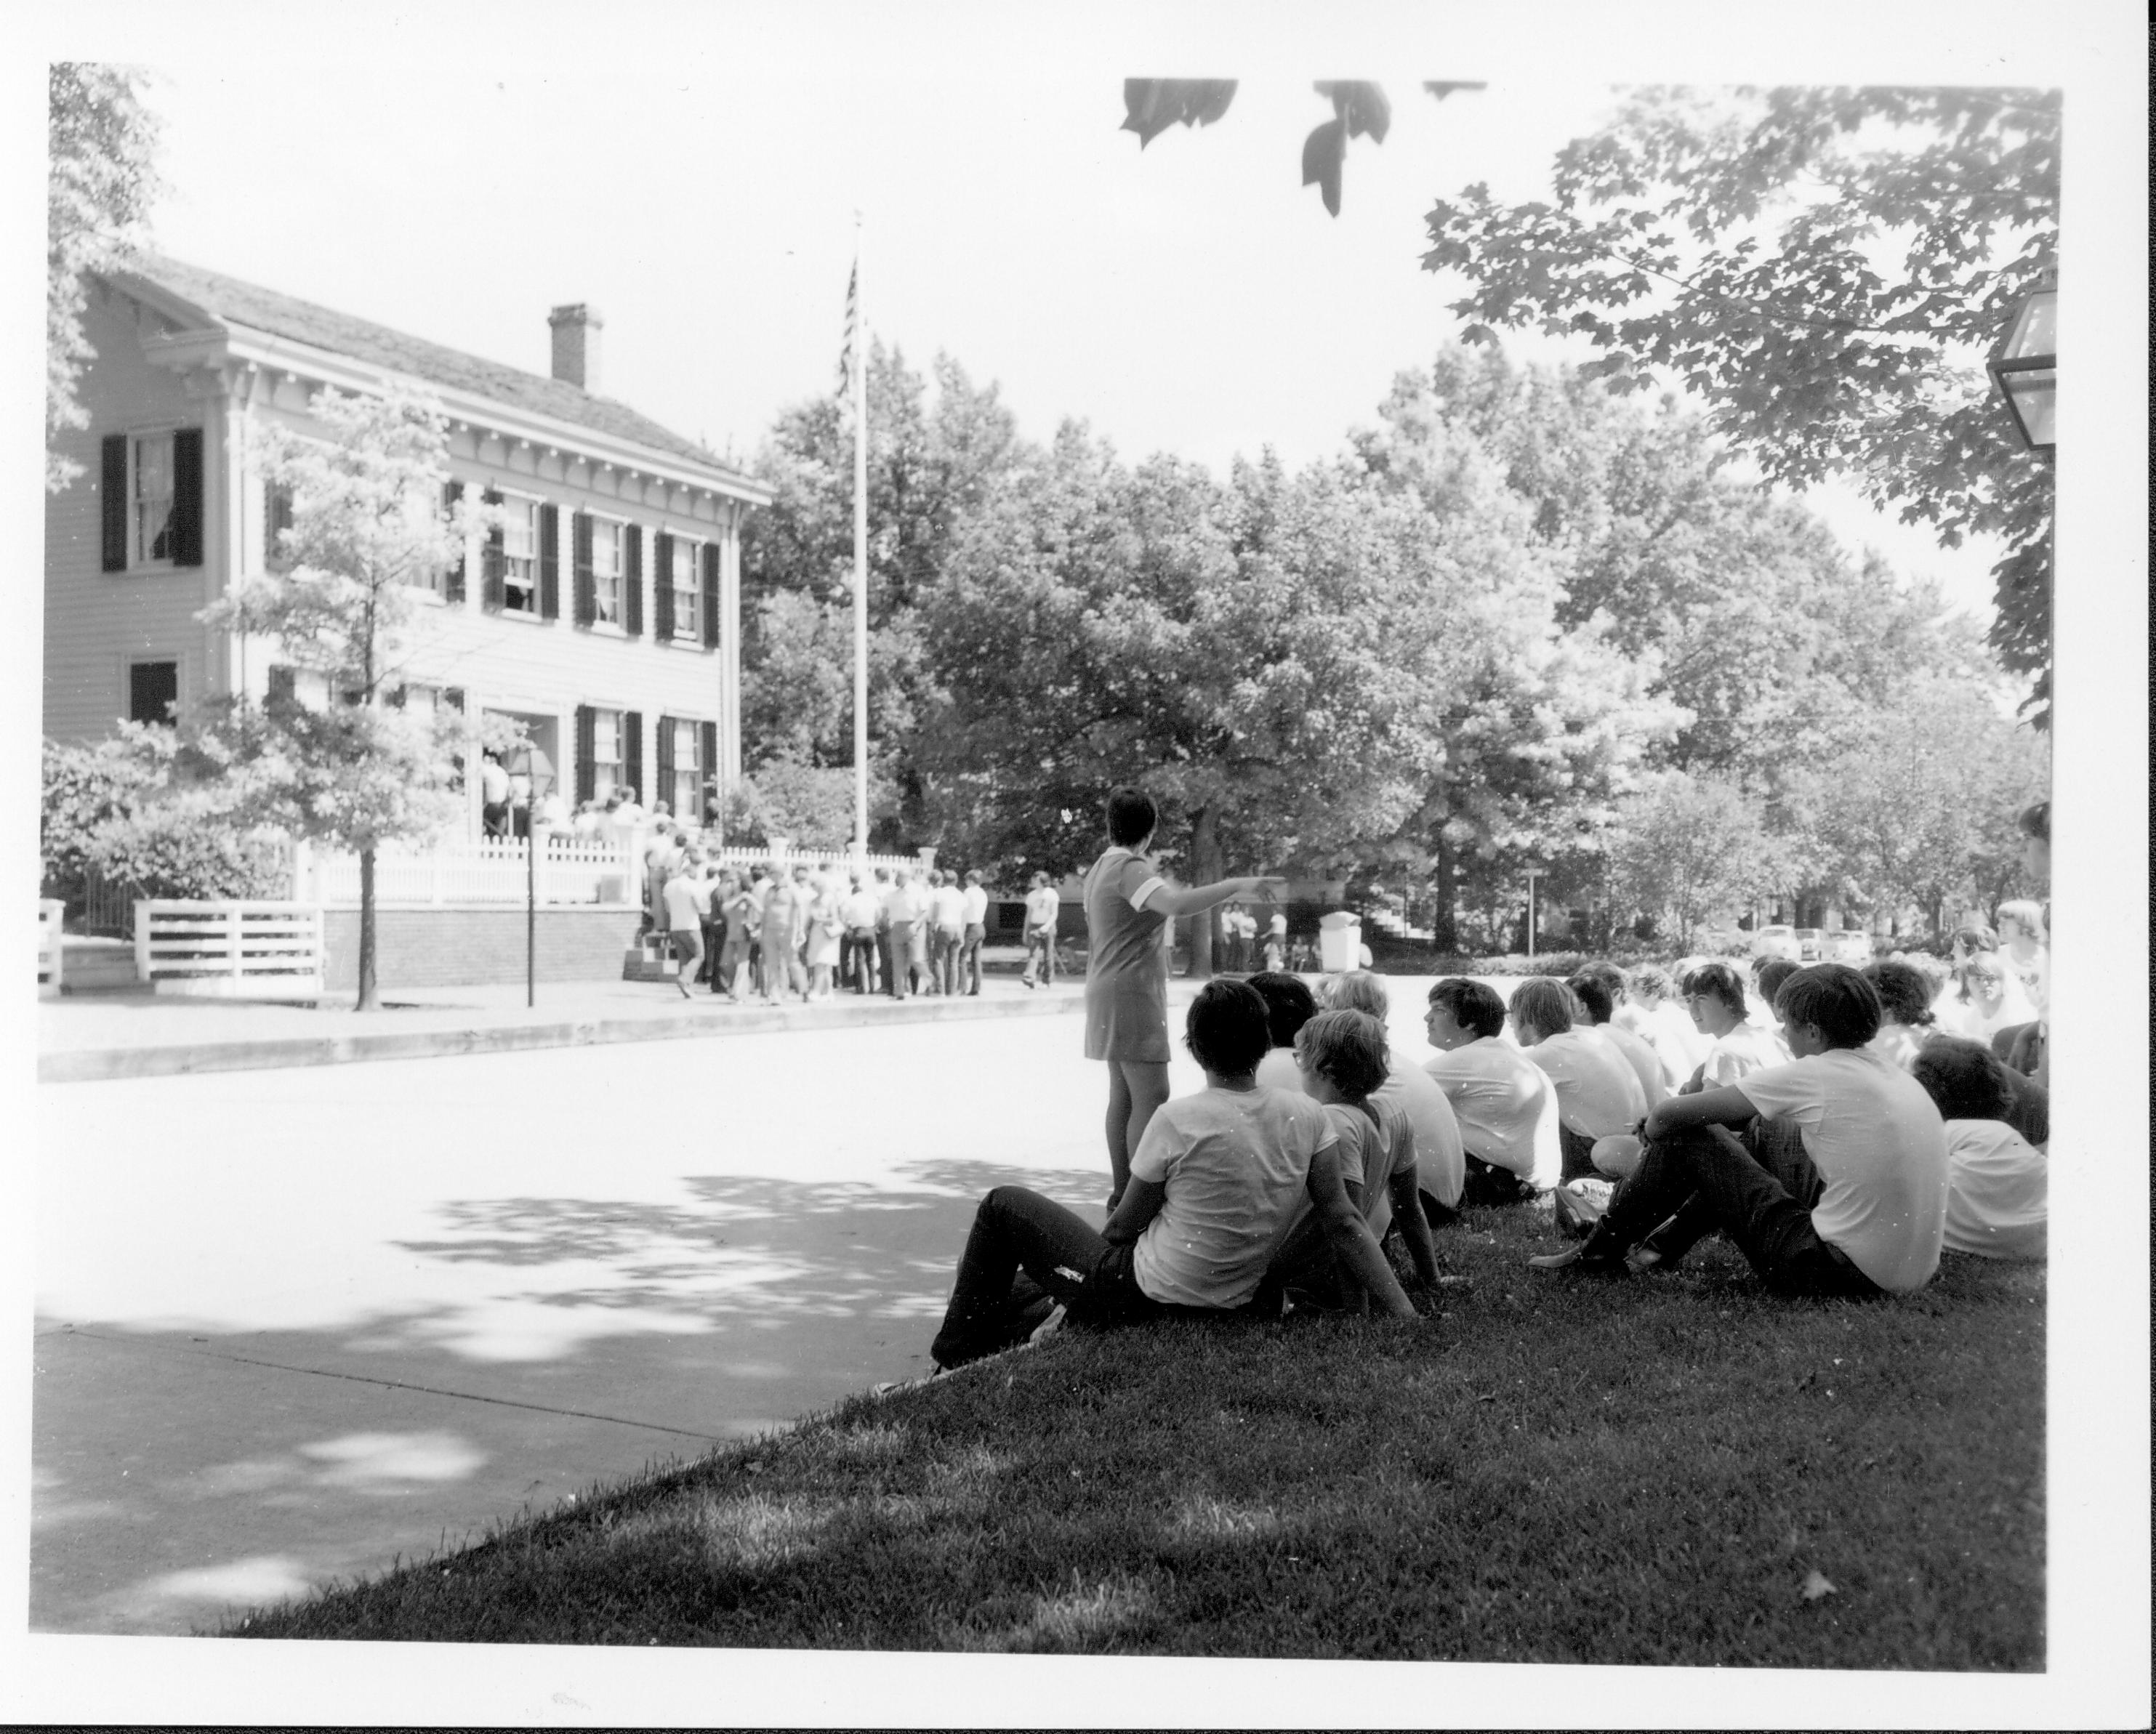 Seasonal Interpreter Jacque Williams and group across from Lincoln Home Class 8, Pic. 5 Interpretive Staff, 1973